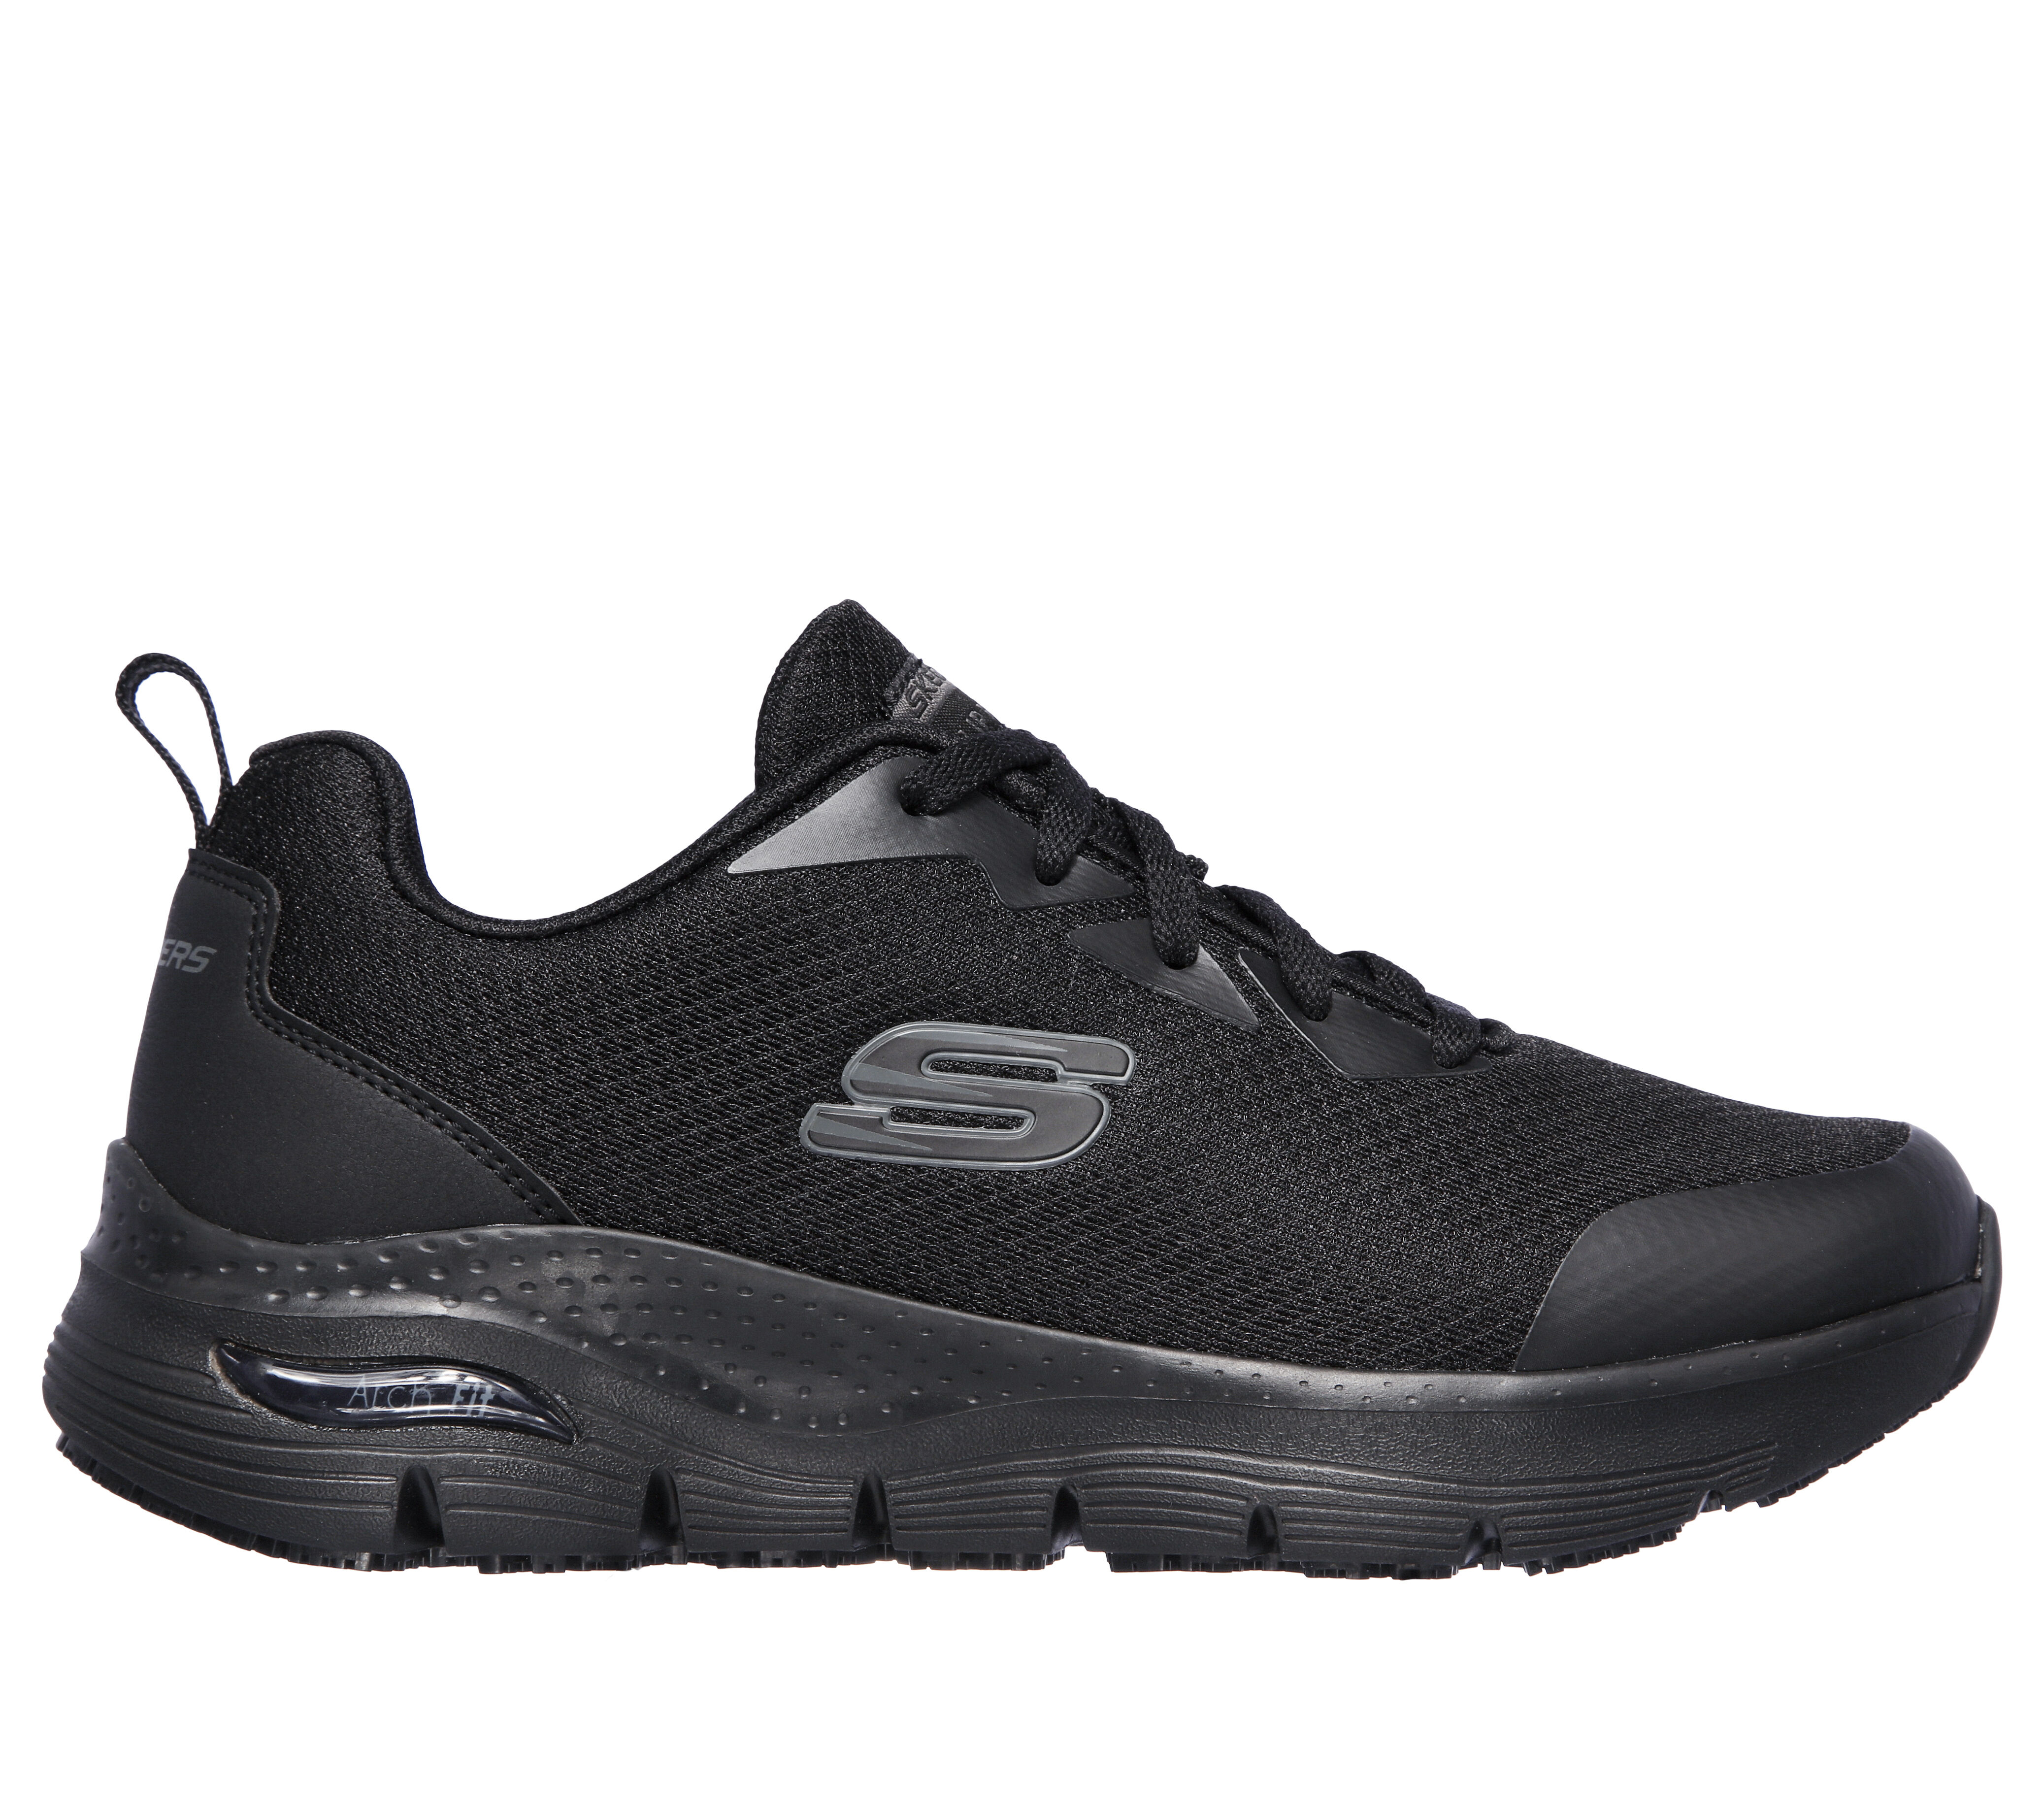 skechers shoes for work